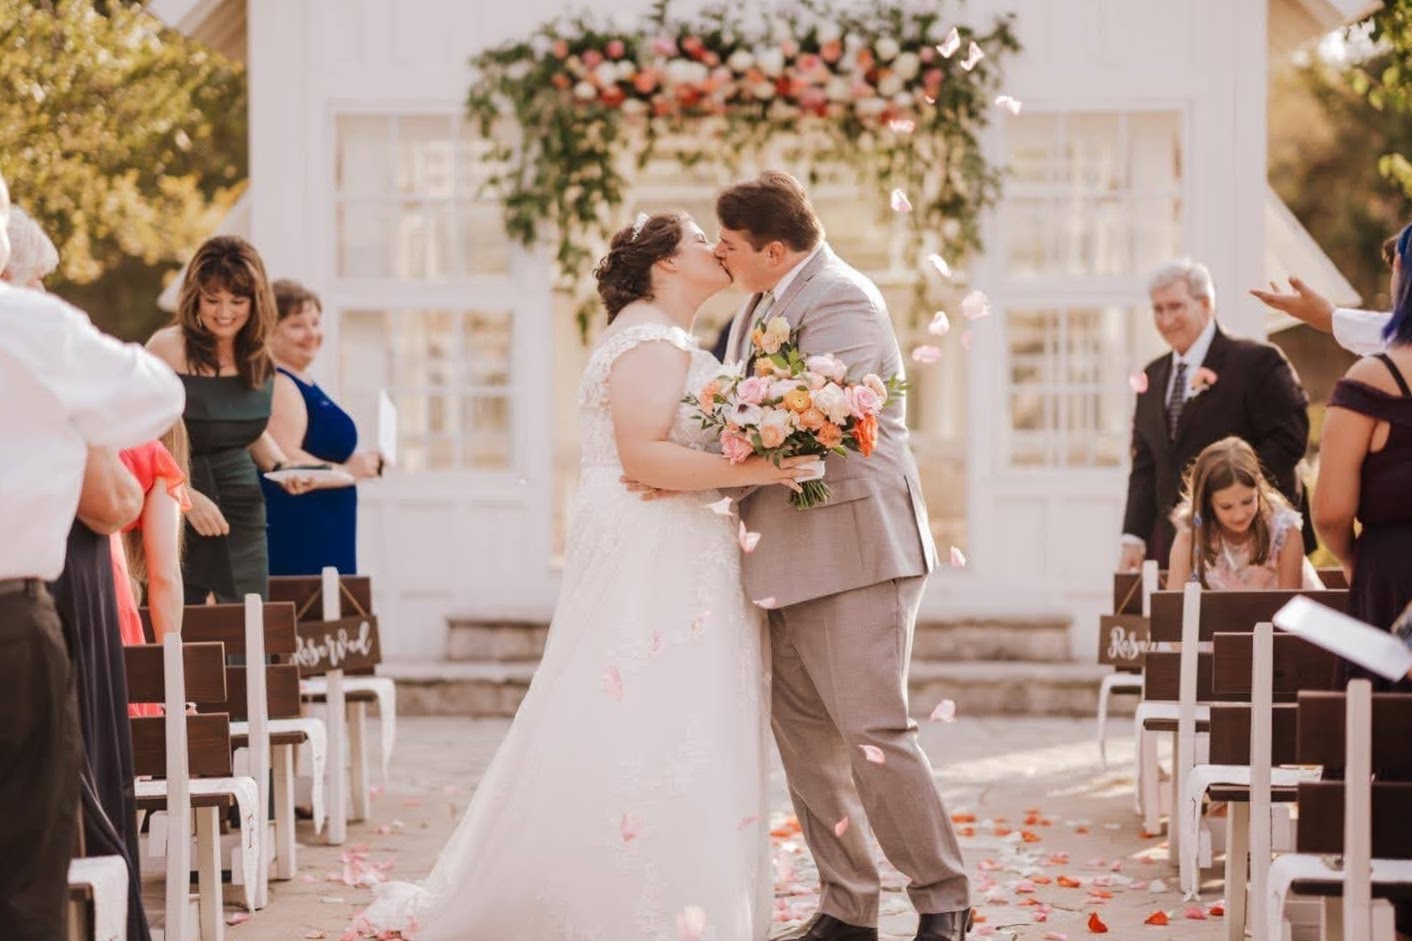 Wedding couple celebrate at the pop of confetti hanging over them and their guests in front of a little white chapel as the bride holds her bouquet like the statue of liberty - Elopement Package